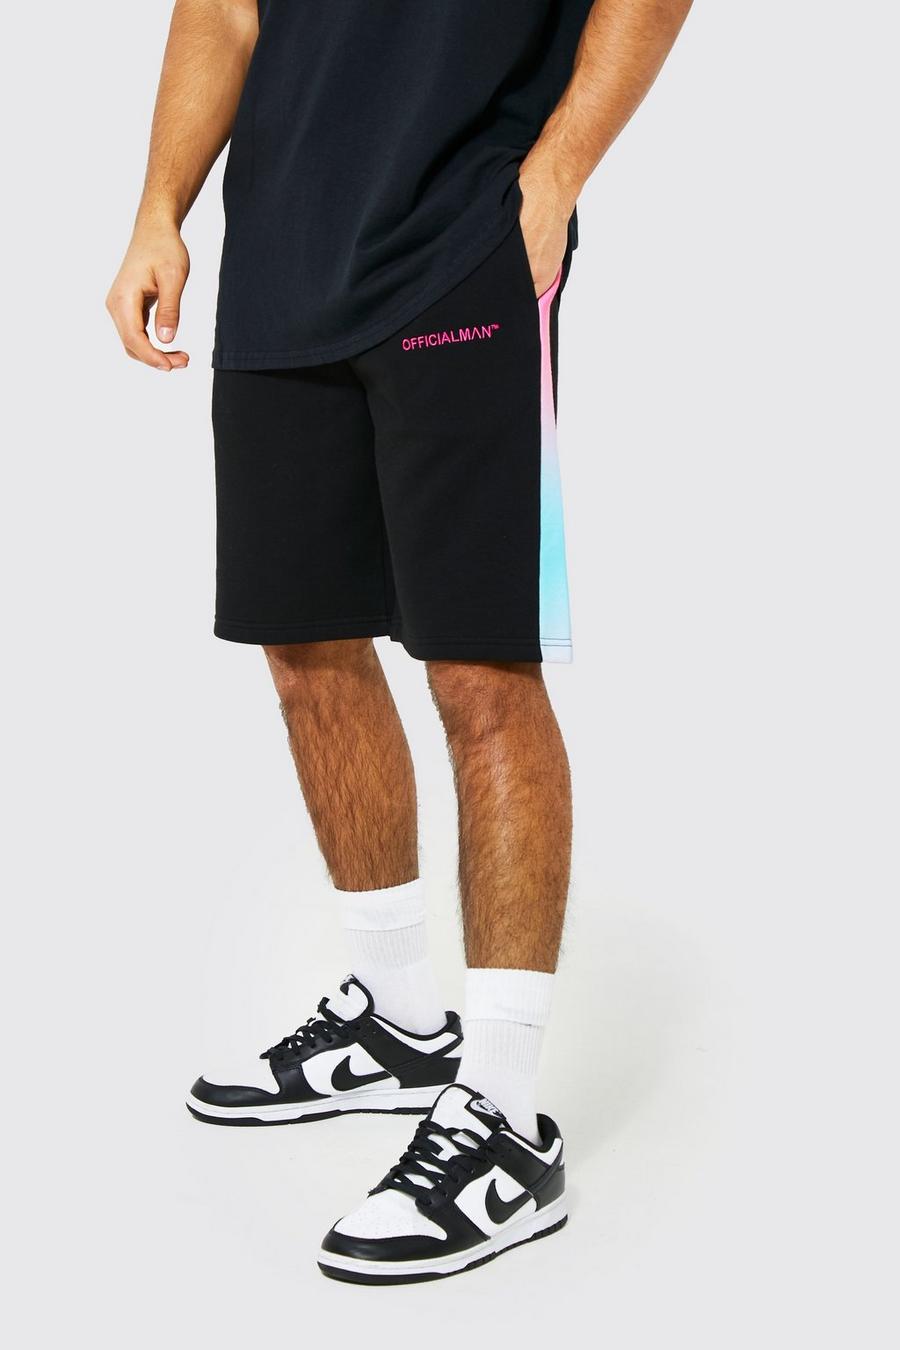 Black Oversized Official Man Ombre Panel Shorts